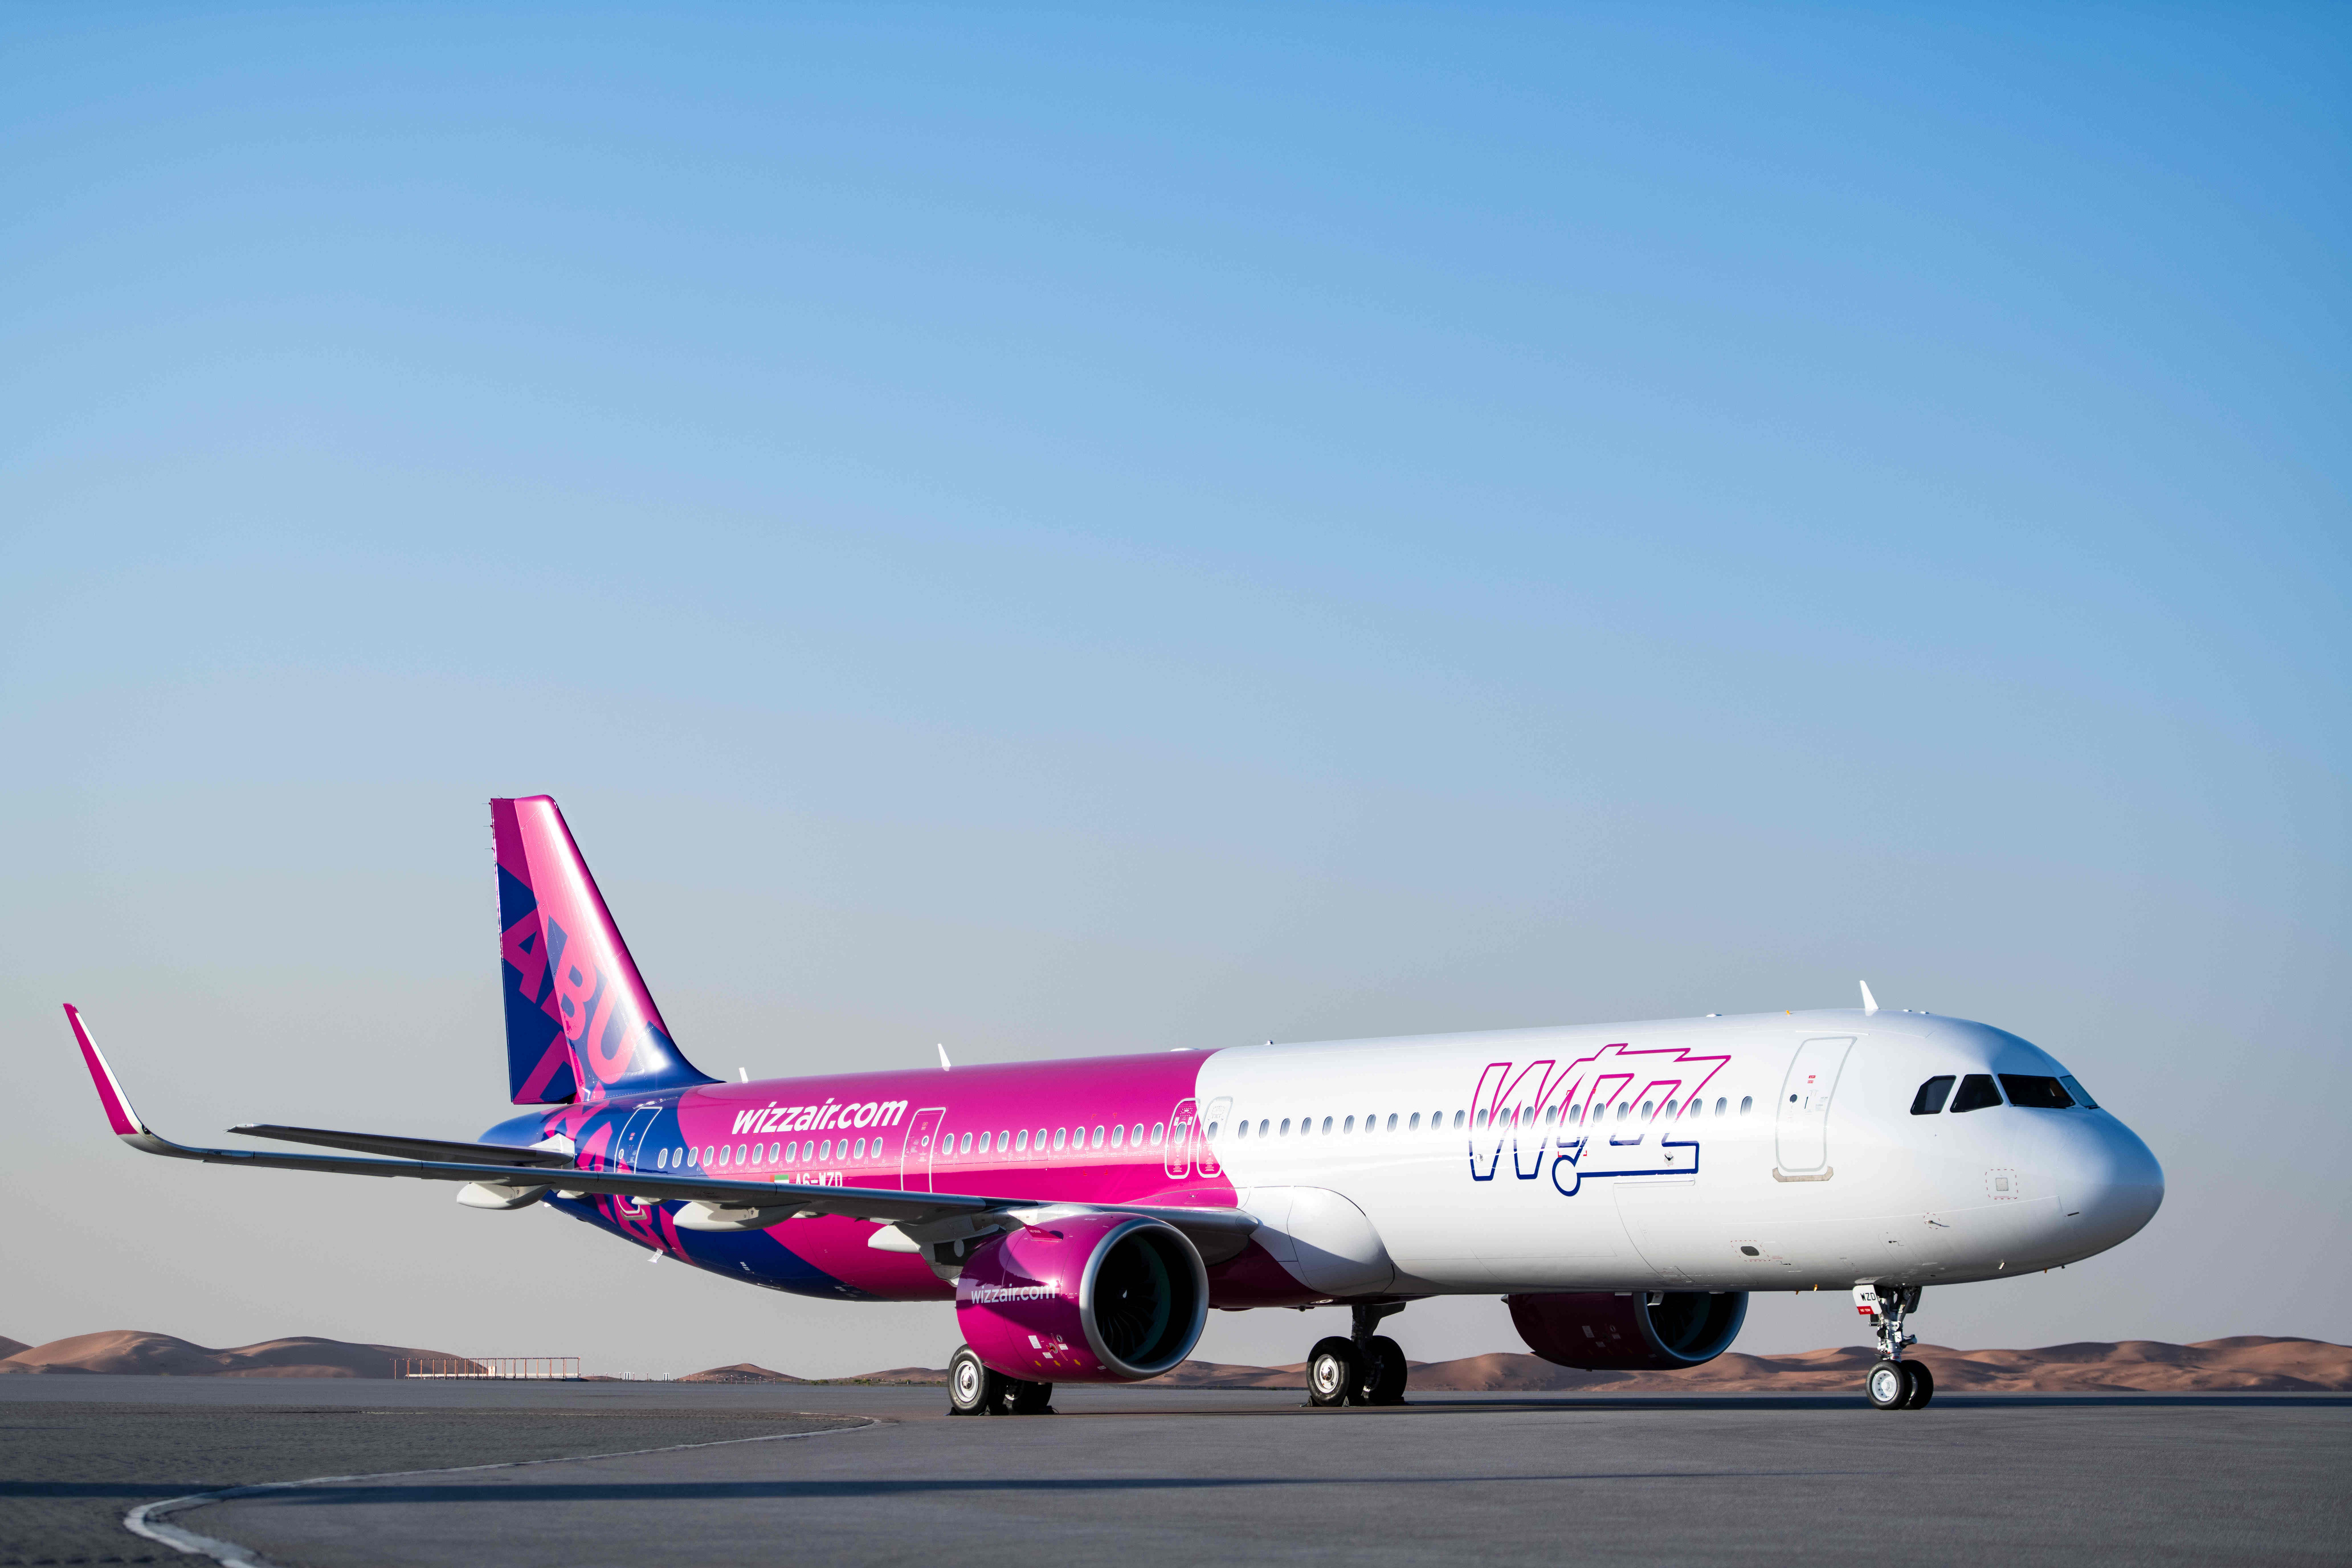 Wizz Air Abu Dhabi Share Love Of Travel With A Once-In-A-lifetime Mystery Flight Into The Unknown